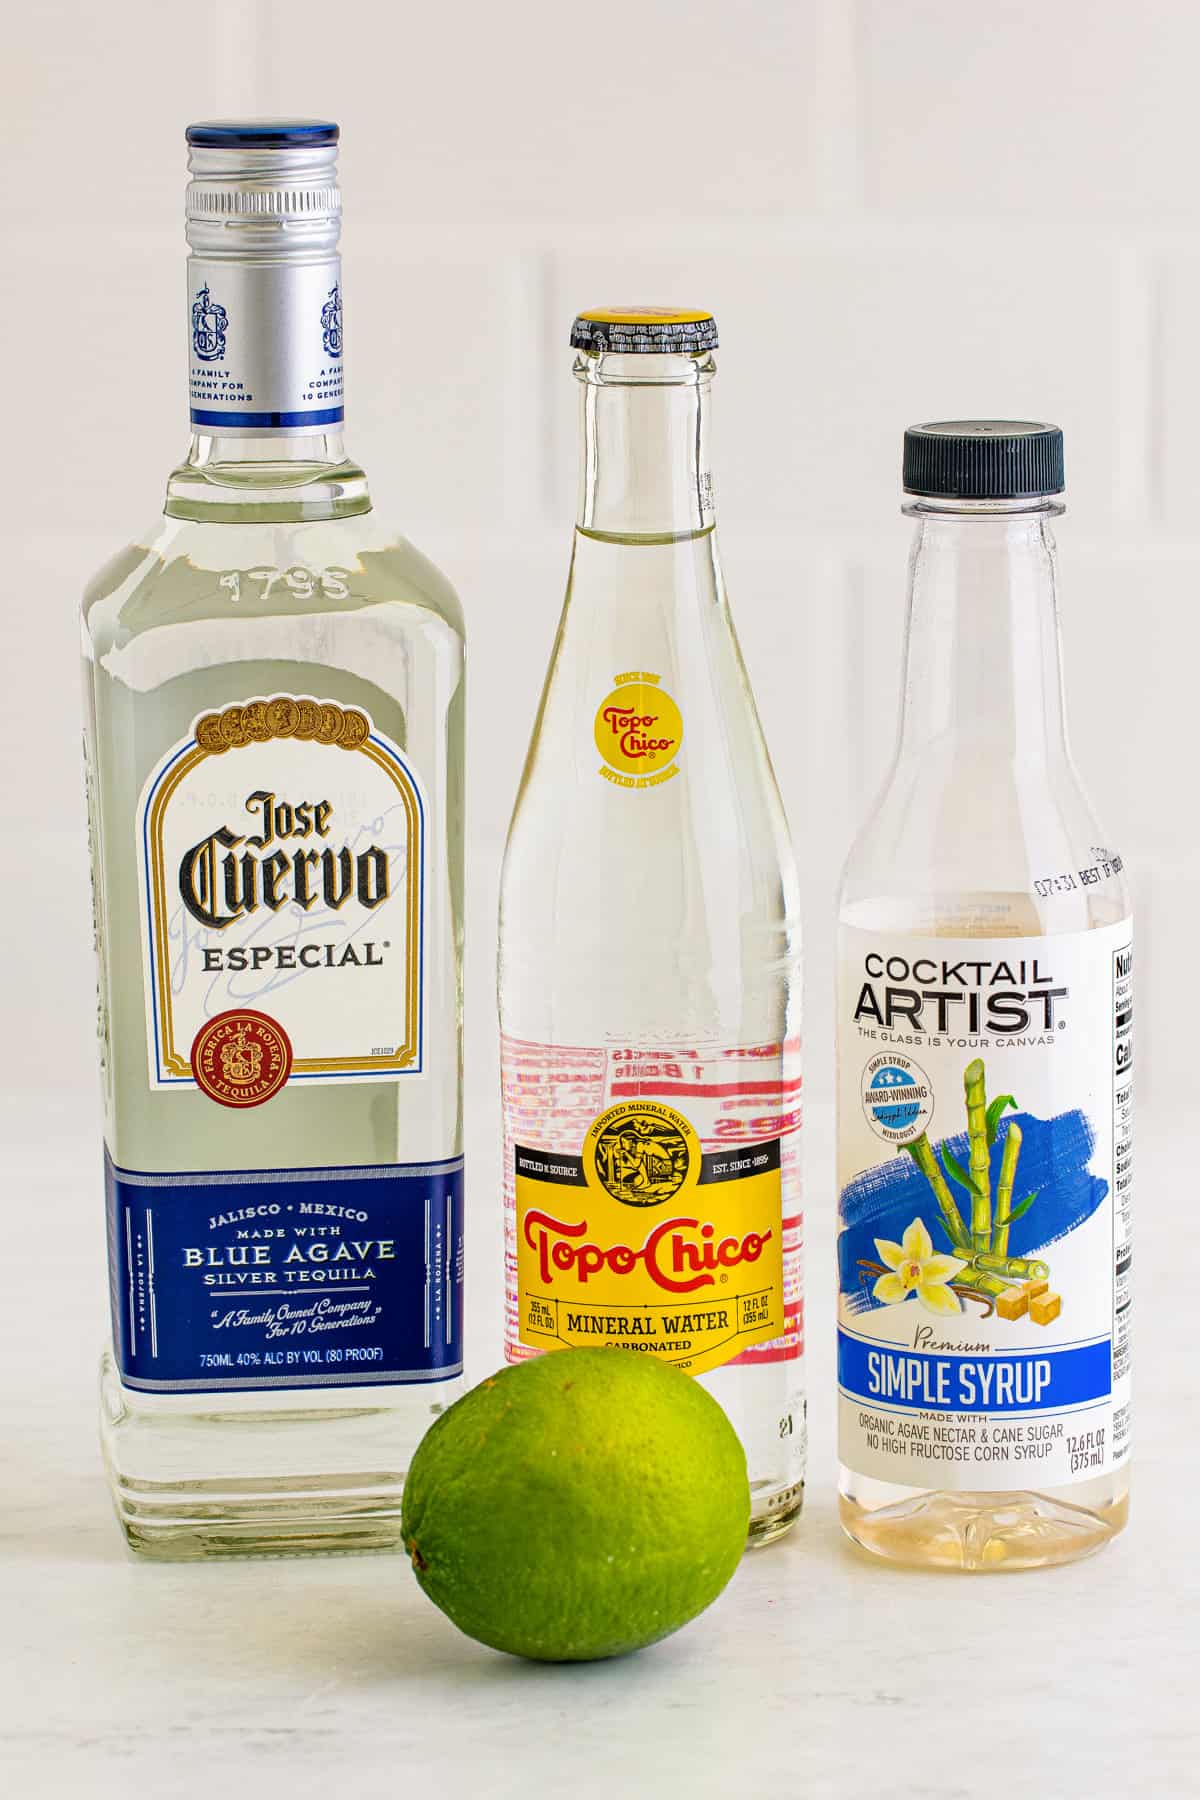 Ingredients for Ranch Water Cocktail: Tequila blanco, Topo Chico, simple syrup, and lime.